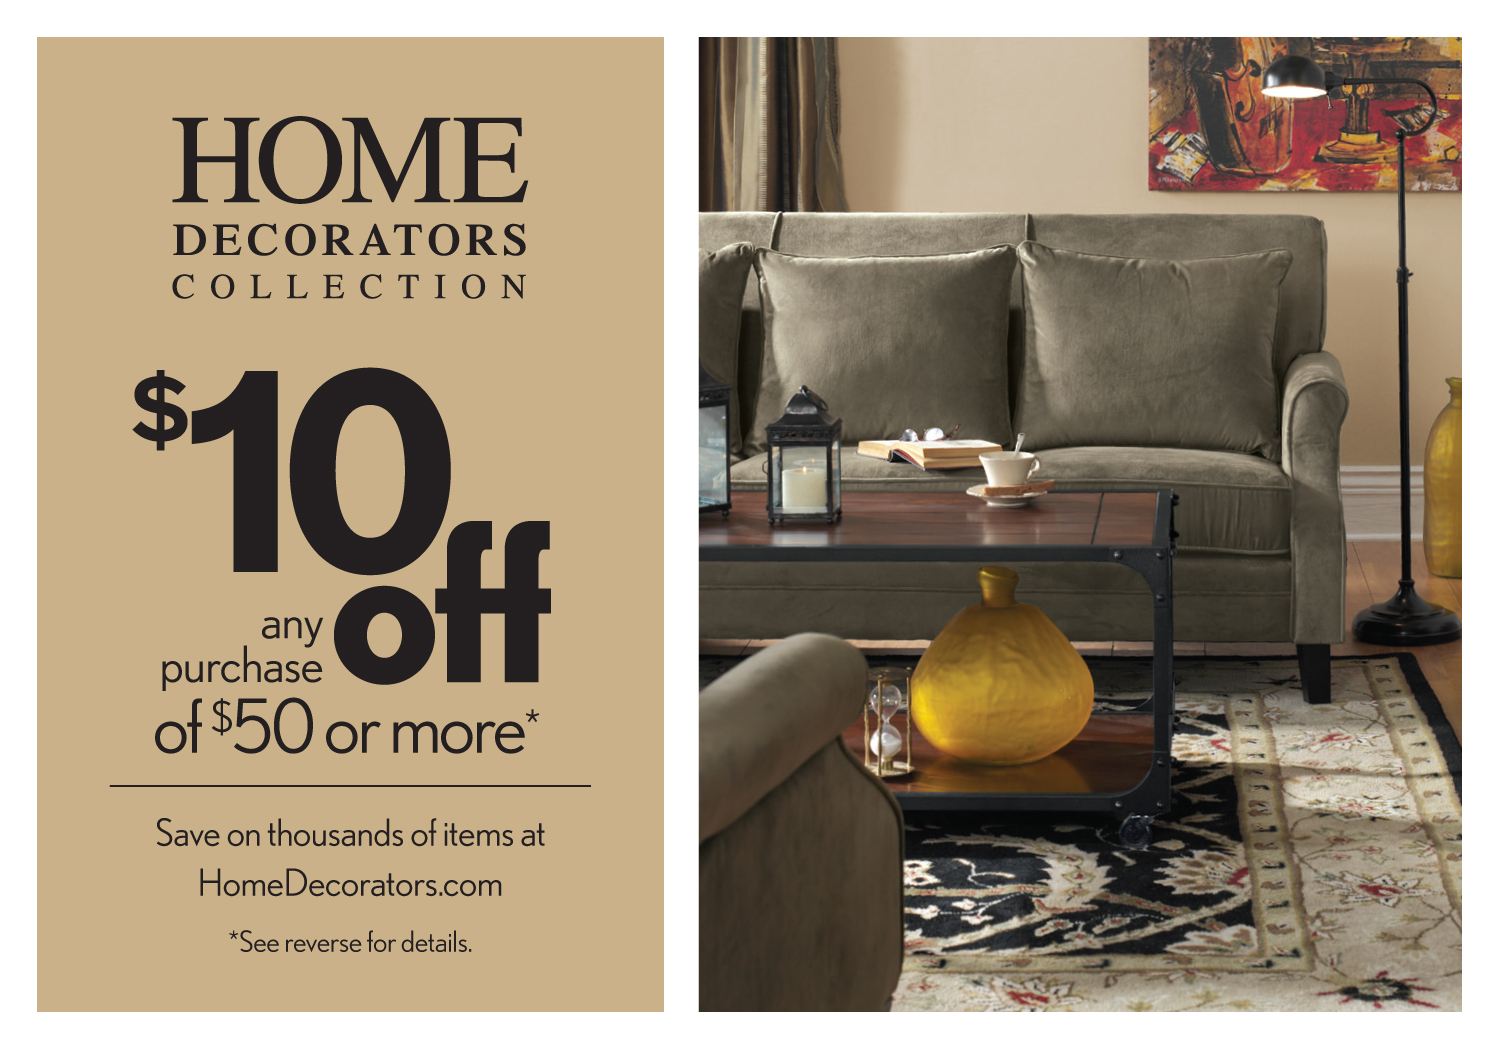 Home Decorators Collection Direct Mail